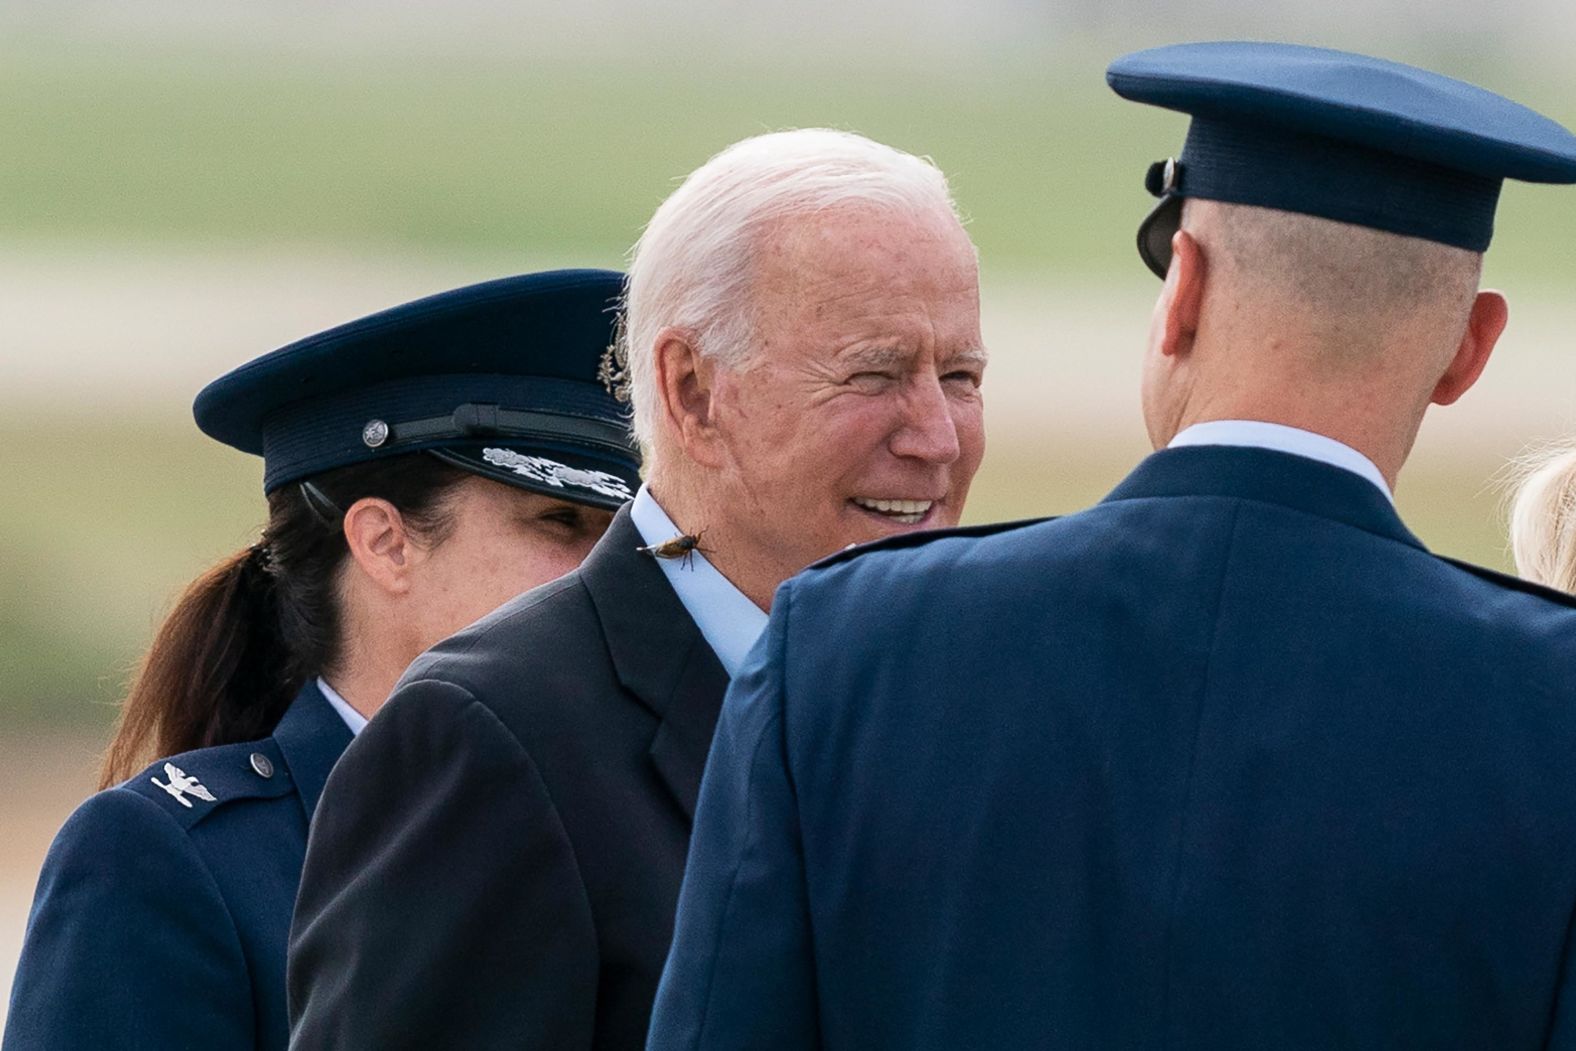 Biden, with a Brood X cicada on his neck, boards Air Force One in Maryland.